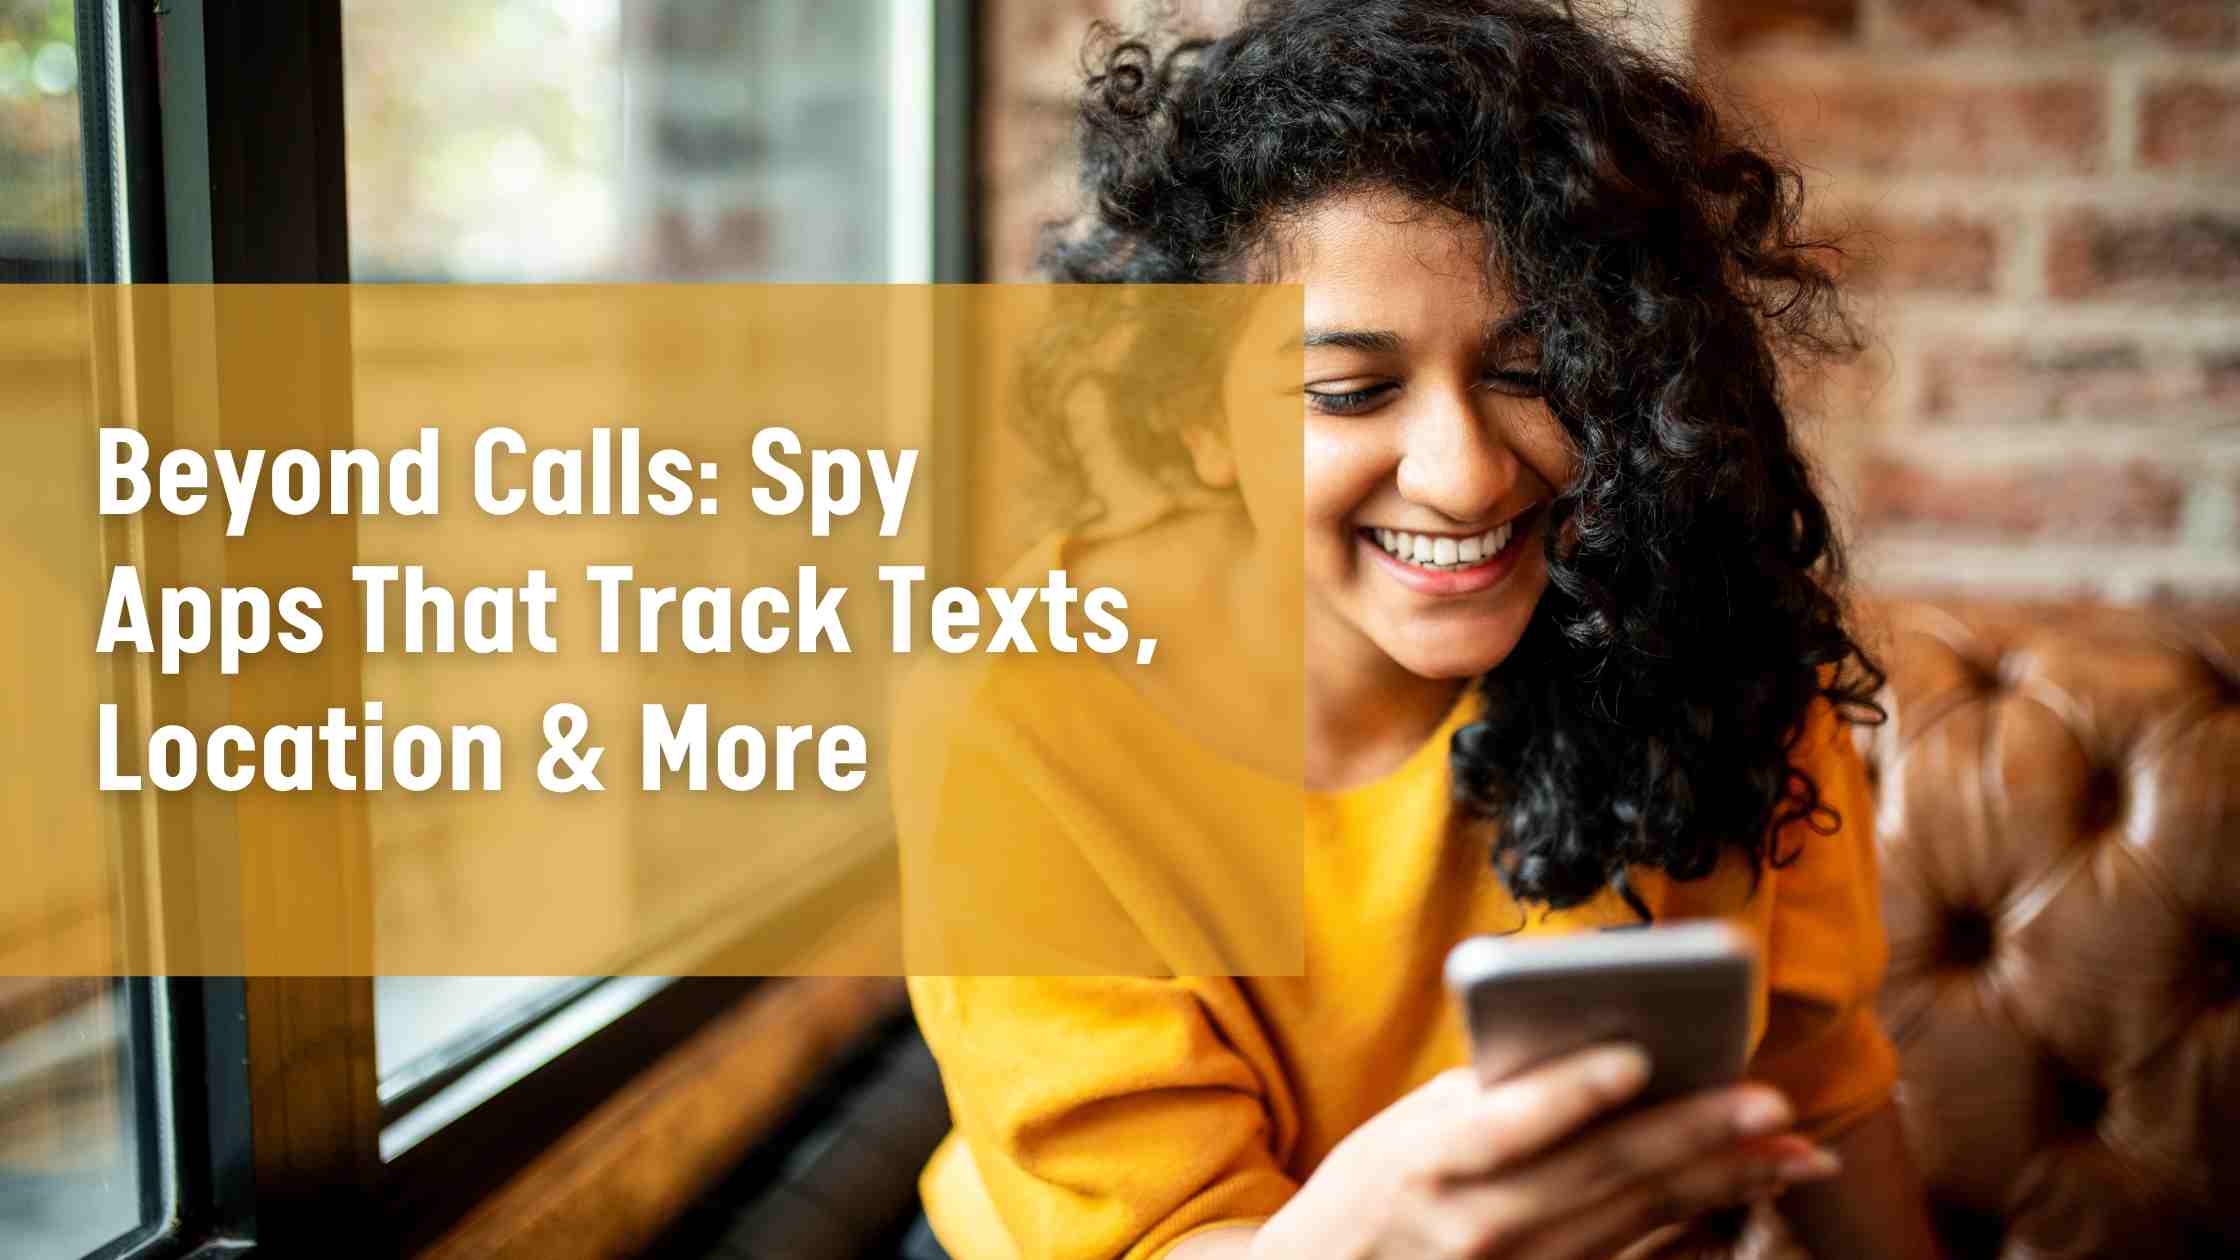 Beyond Calls Spy Apps That Track Texts, Location & More_